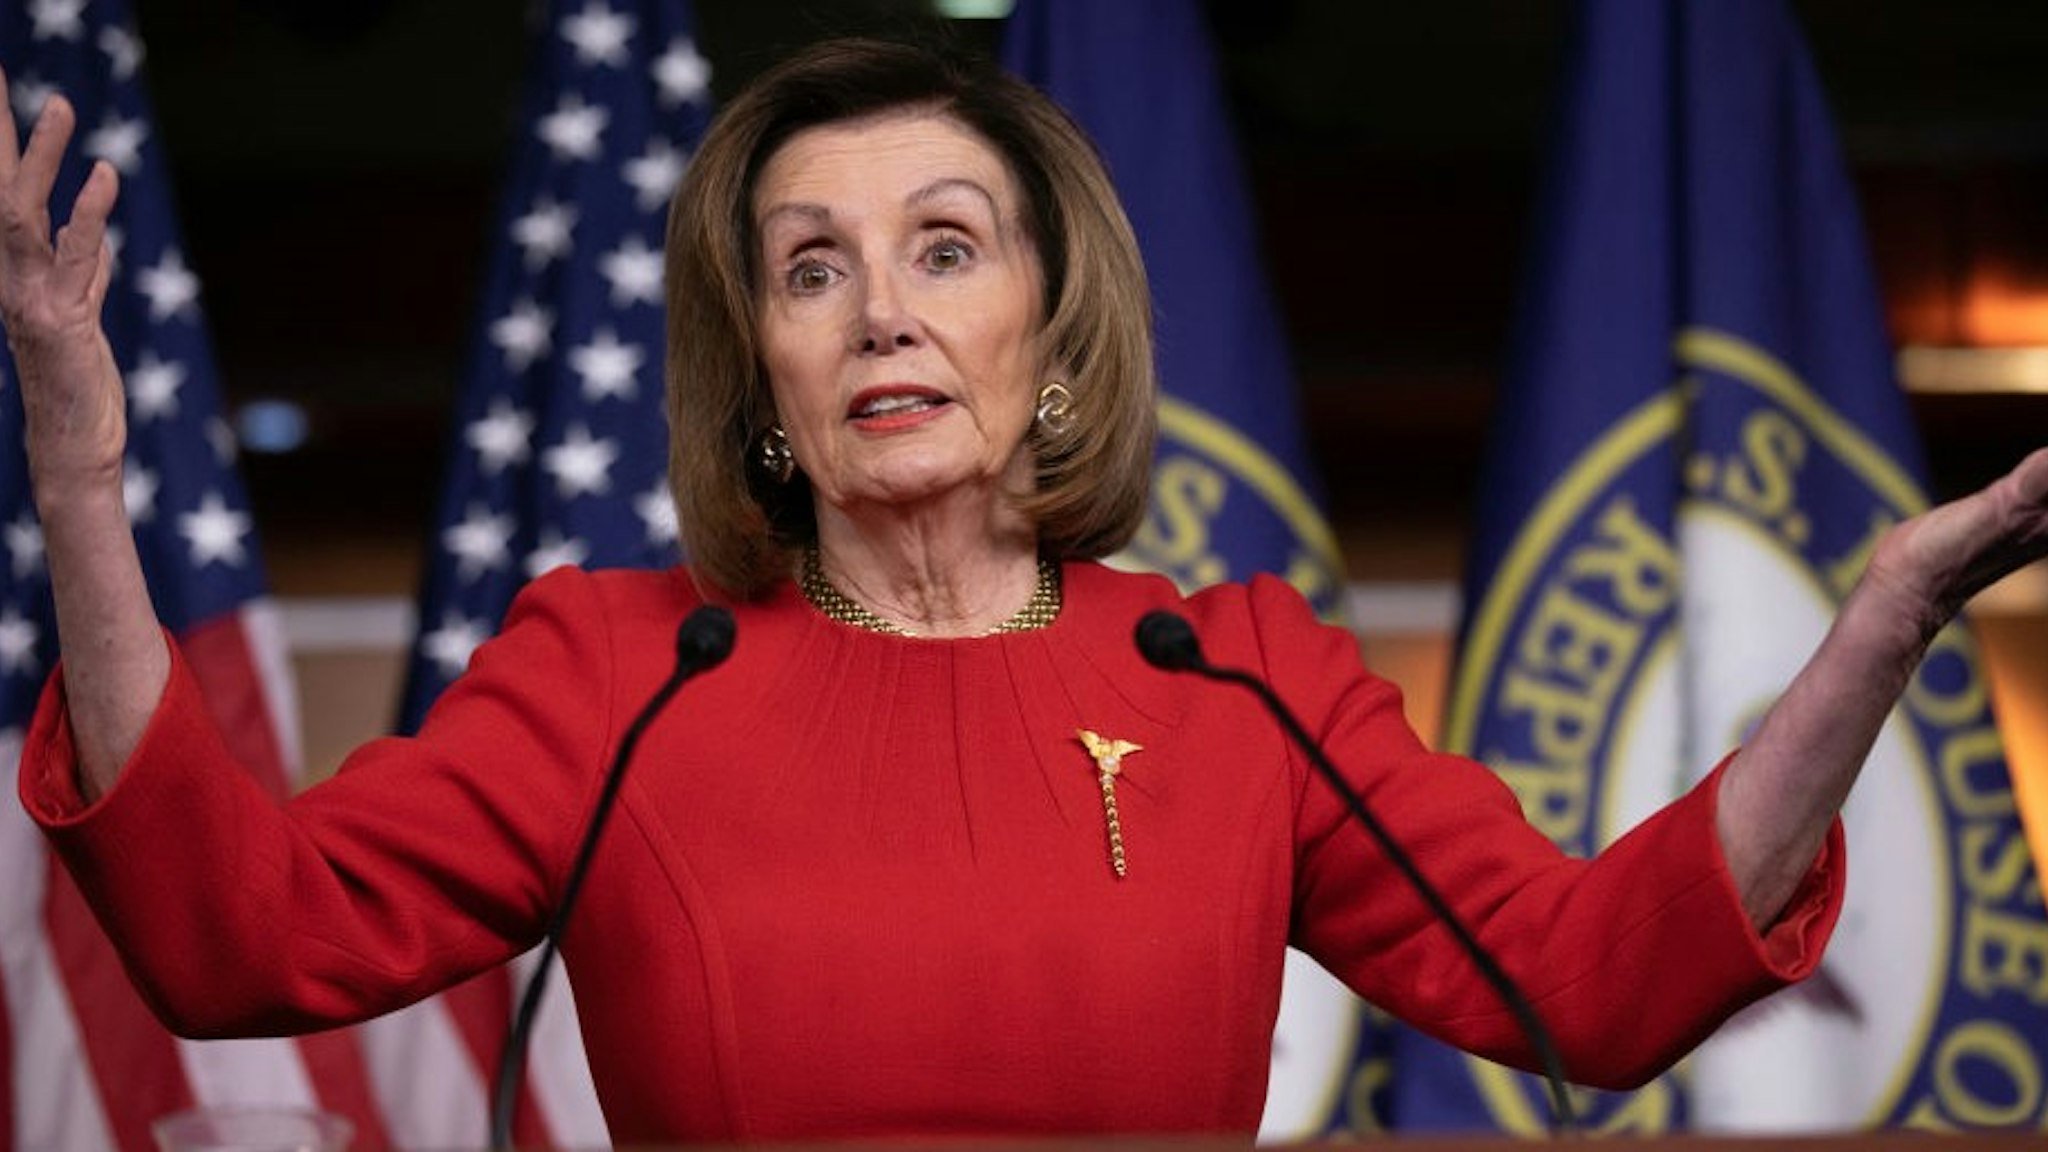 U.S. House Speaker Nancy Pelosi (D-CA) talks about the remaining legislative business and the House of Representatives vote to impeach U.S. President Donald Trump during her final weekly news conference of 2019 at the U.S. Capitol in Washington, U.S., December 19, 2019.